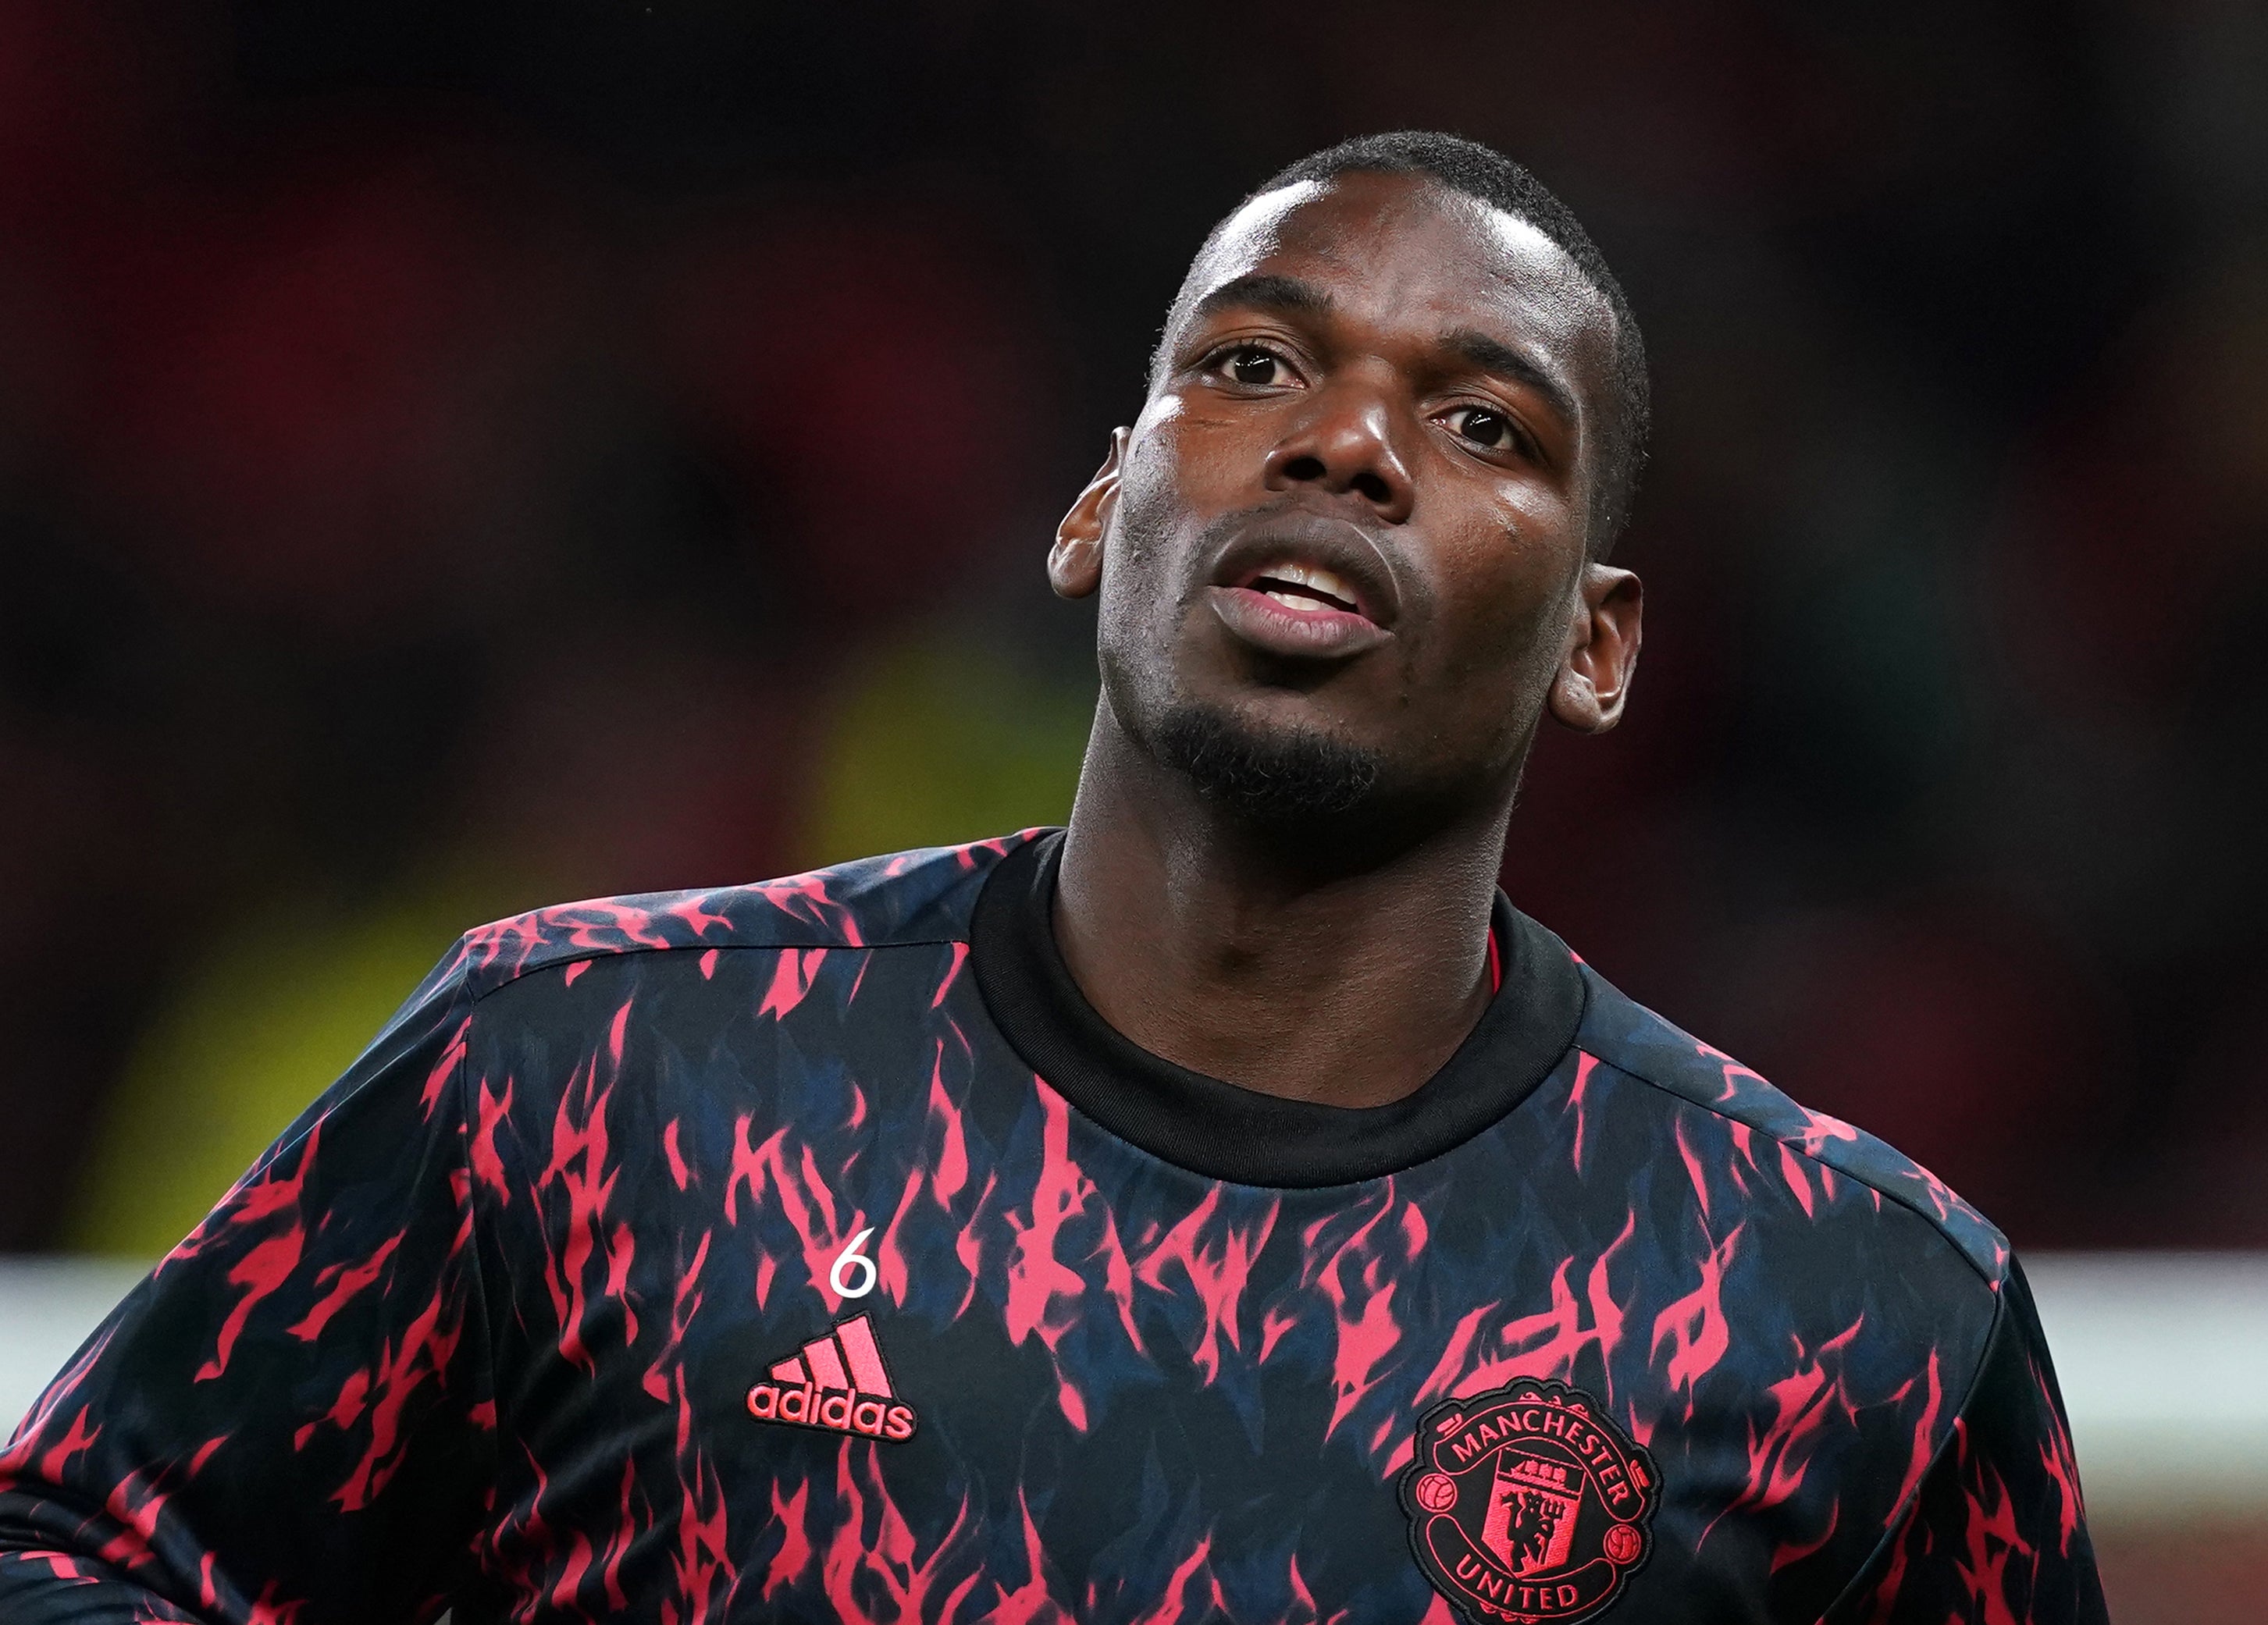 Paris Saint-Germain have made an offer to Paul Pogba as he approaches his final two months at Manchester United (Martin Rickett/PA)